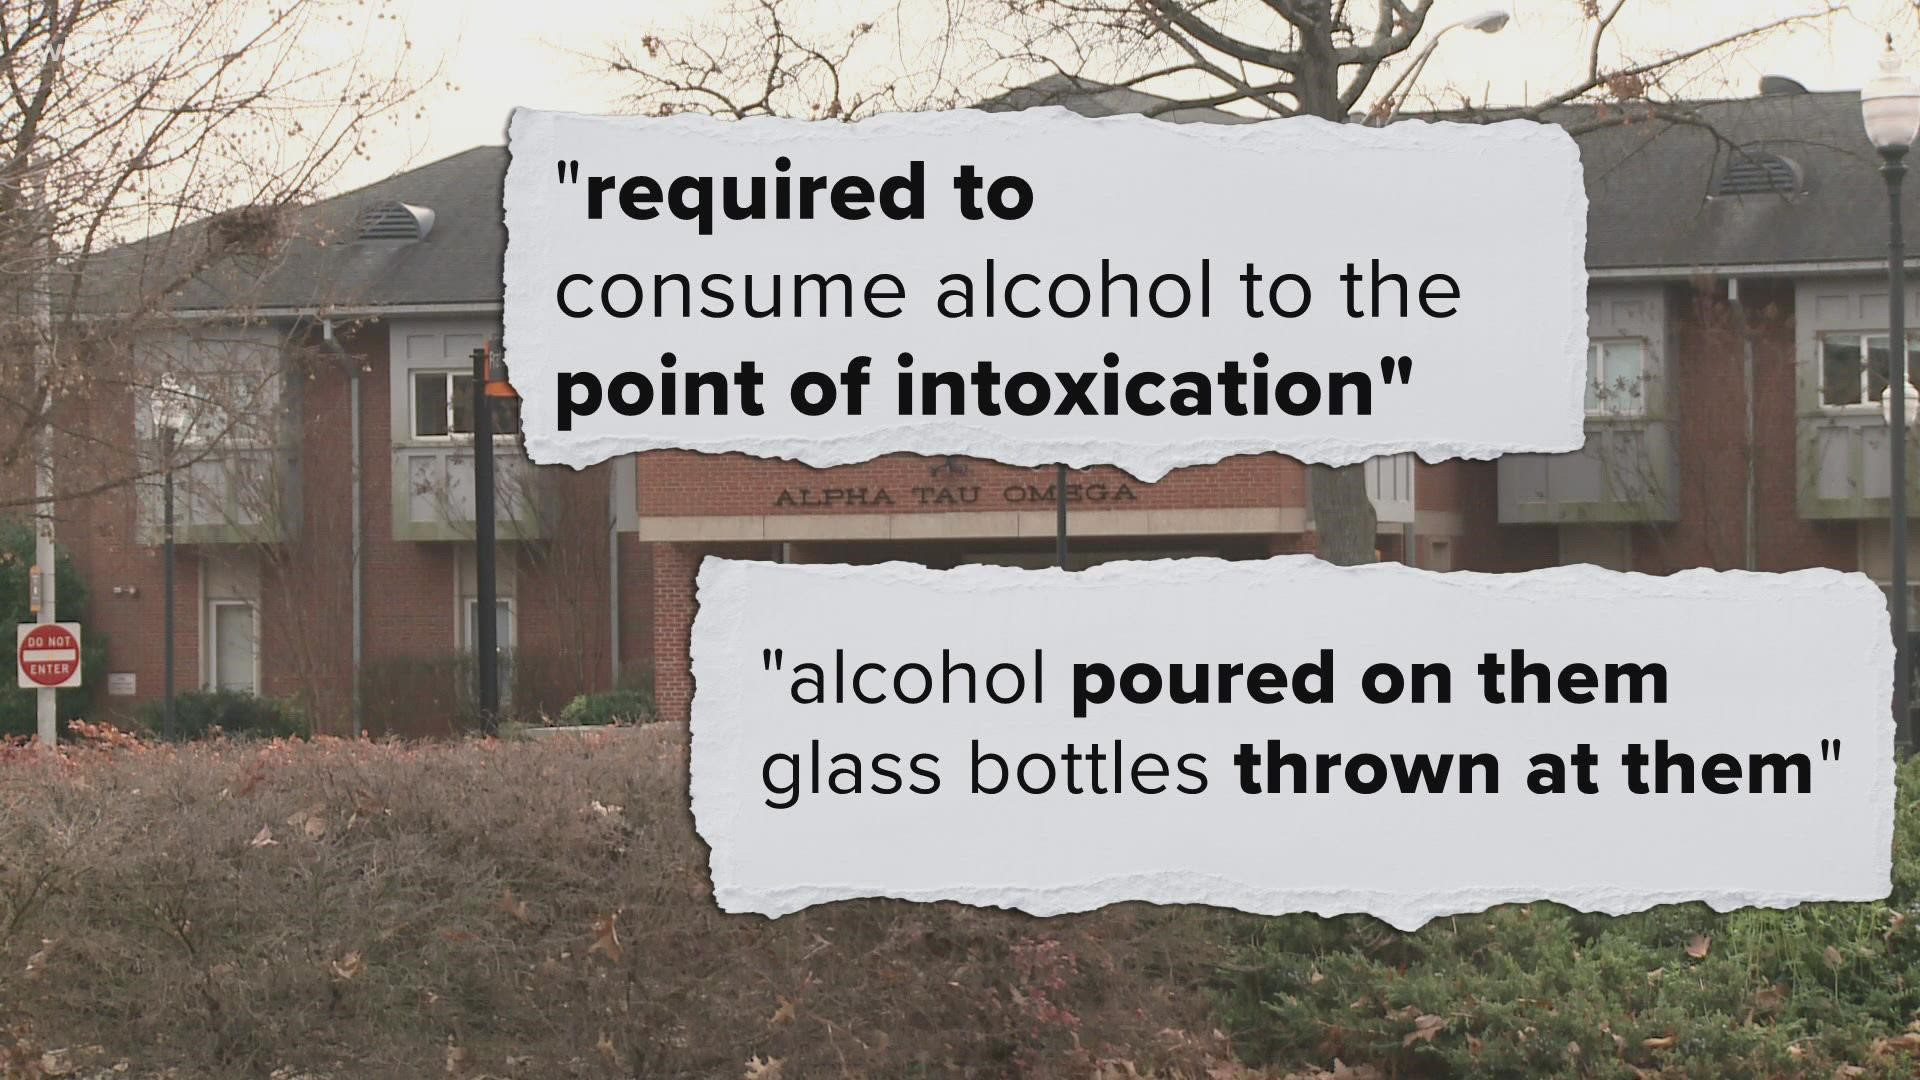 Hazing, drinking games and intense physical training -- that's what documents reveal happened in the Alpha Tau Omega fraternity at UT, and why it was suspended.